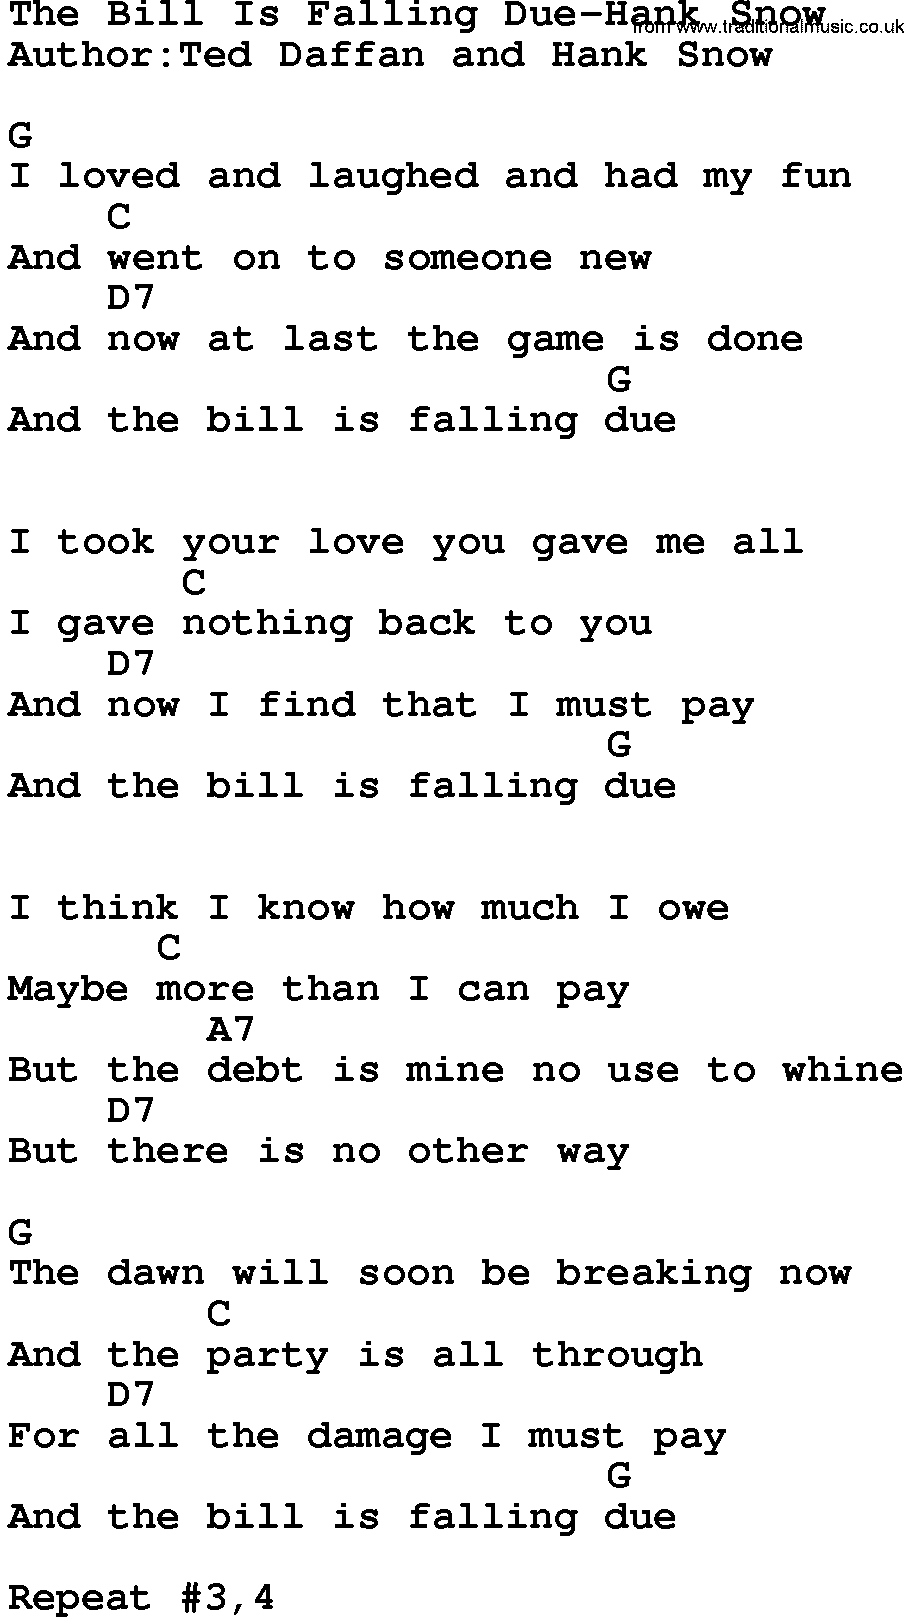 Country music song: The Bill Is Falling Due-Hank Snow lyrics and chords